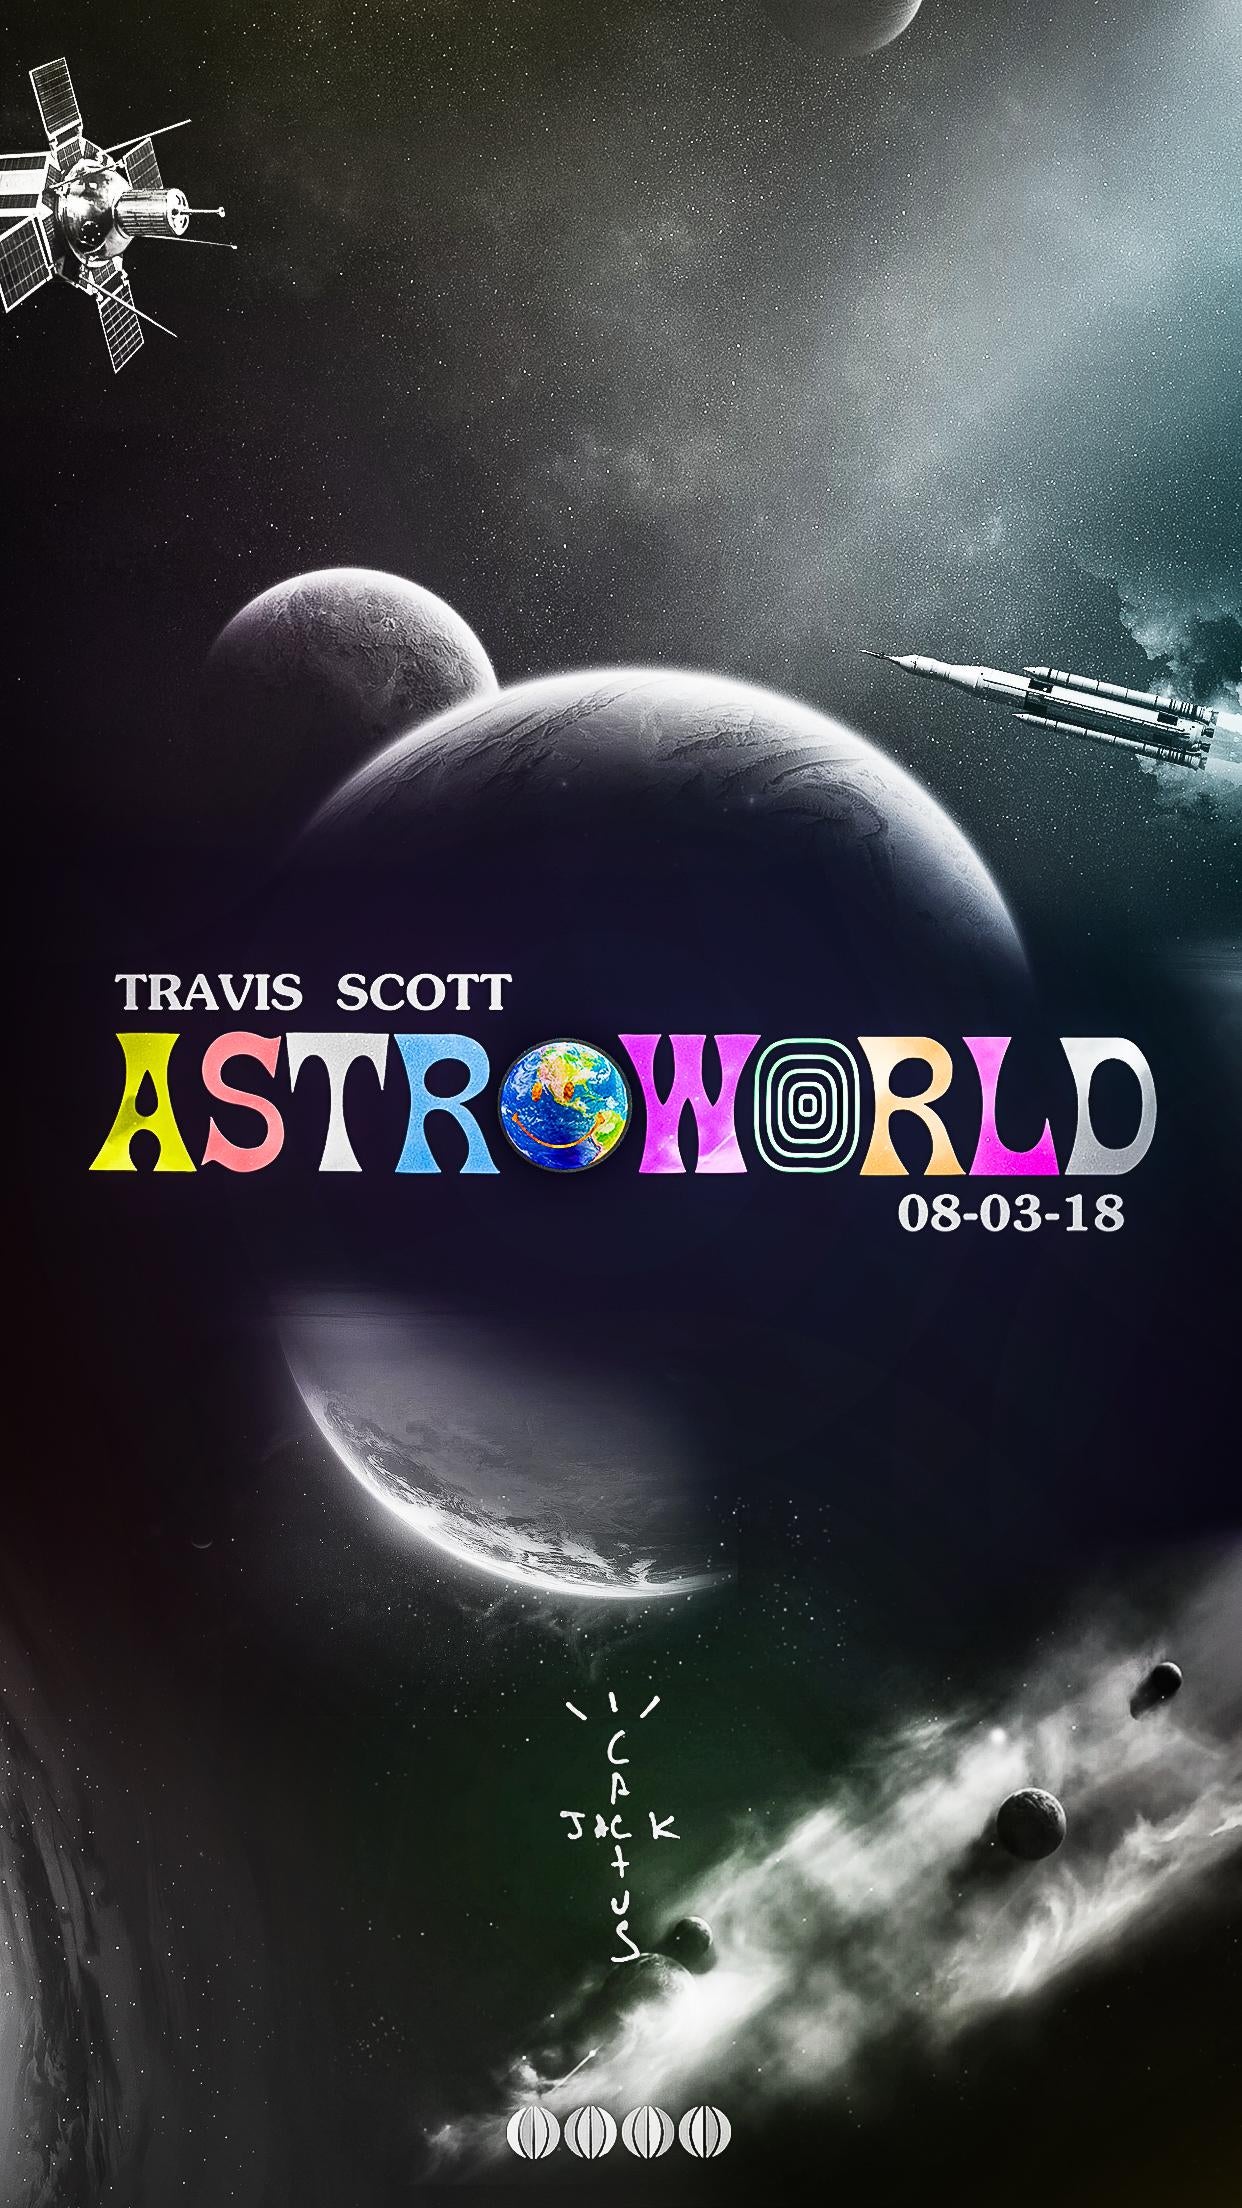 Astroworld Space Jam wallpaper by ItsLitStraightUp  Download on ZEDGE   a1d6